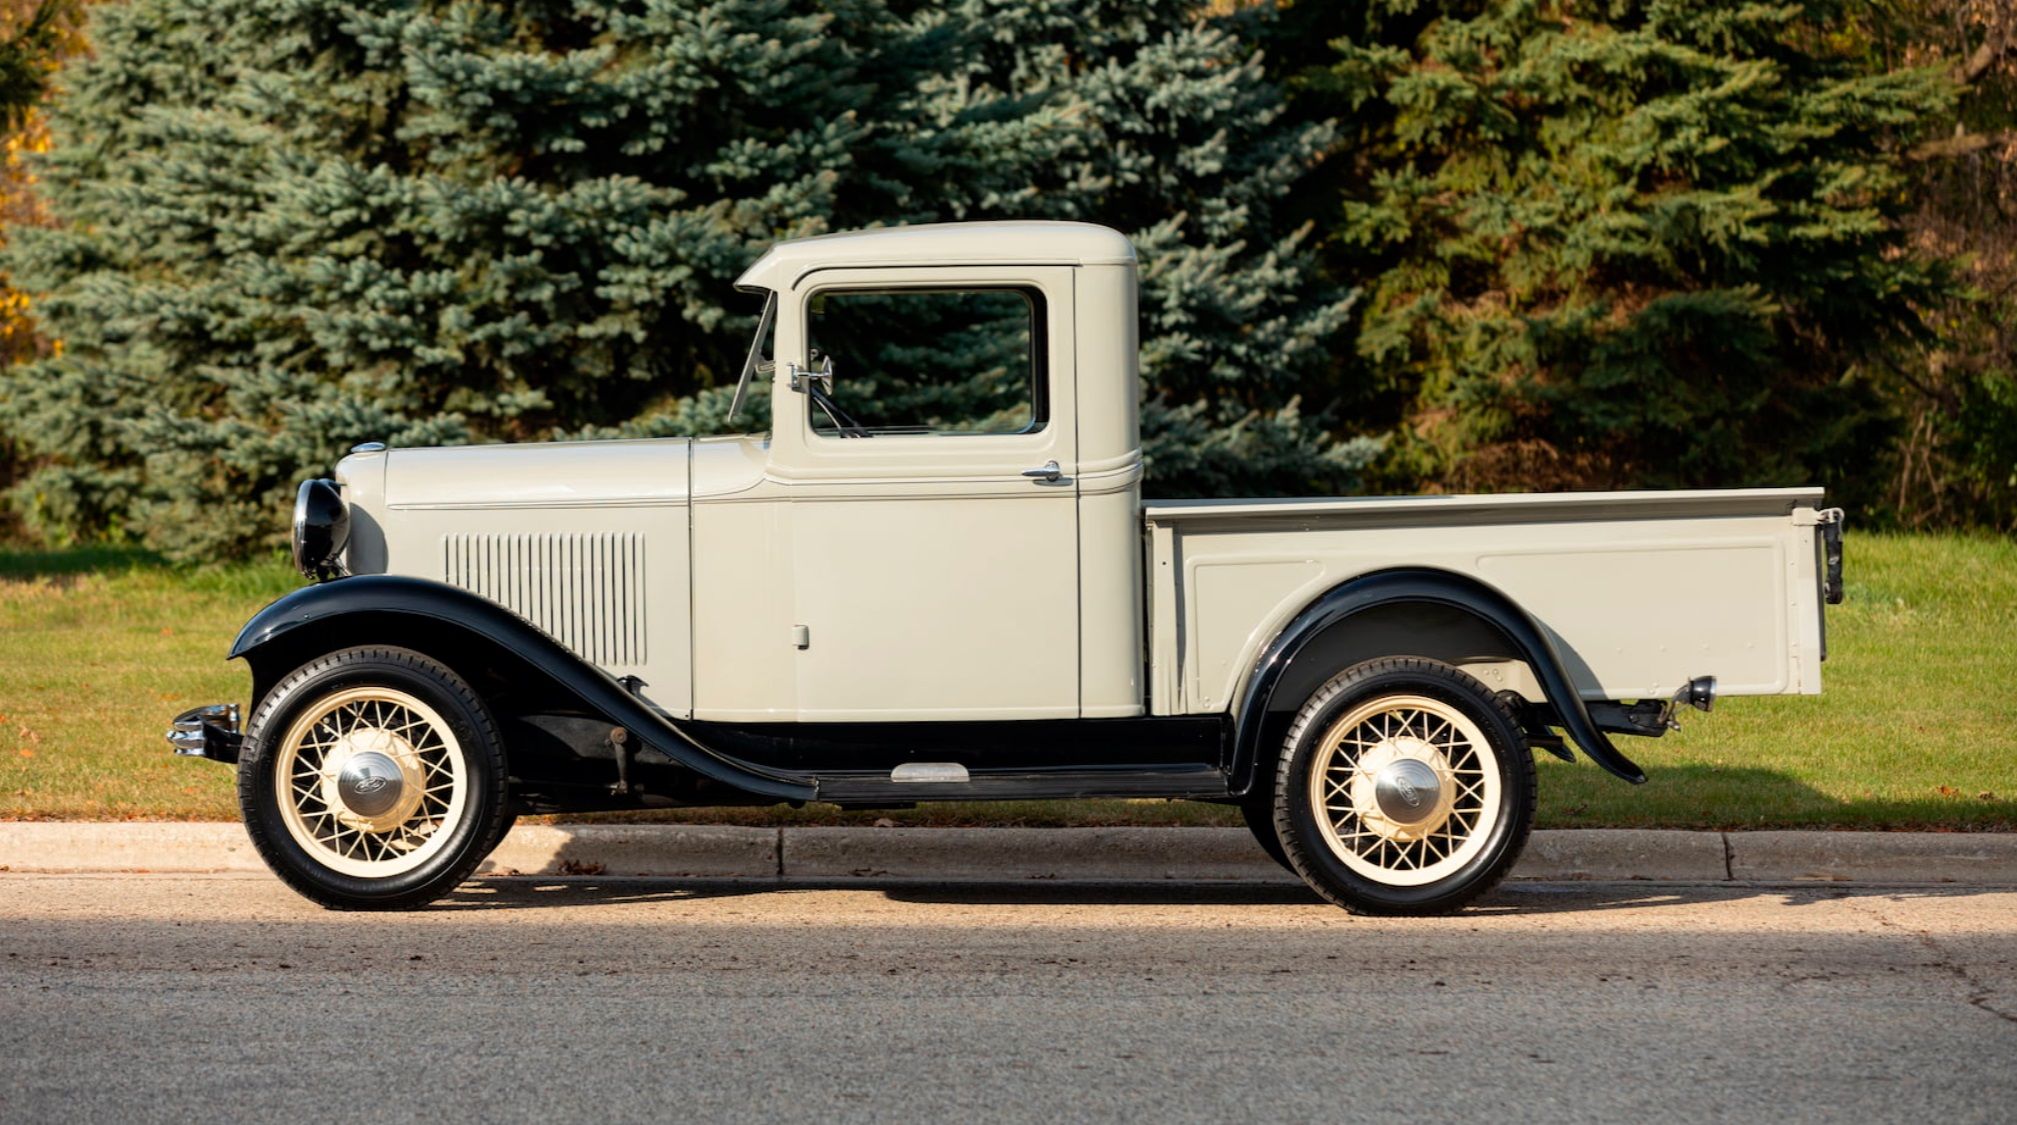 The profile of the 1932 Ford Model B.